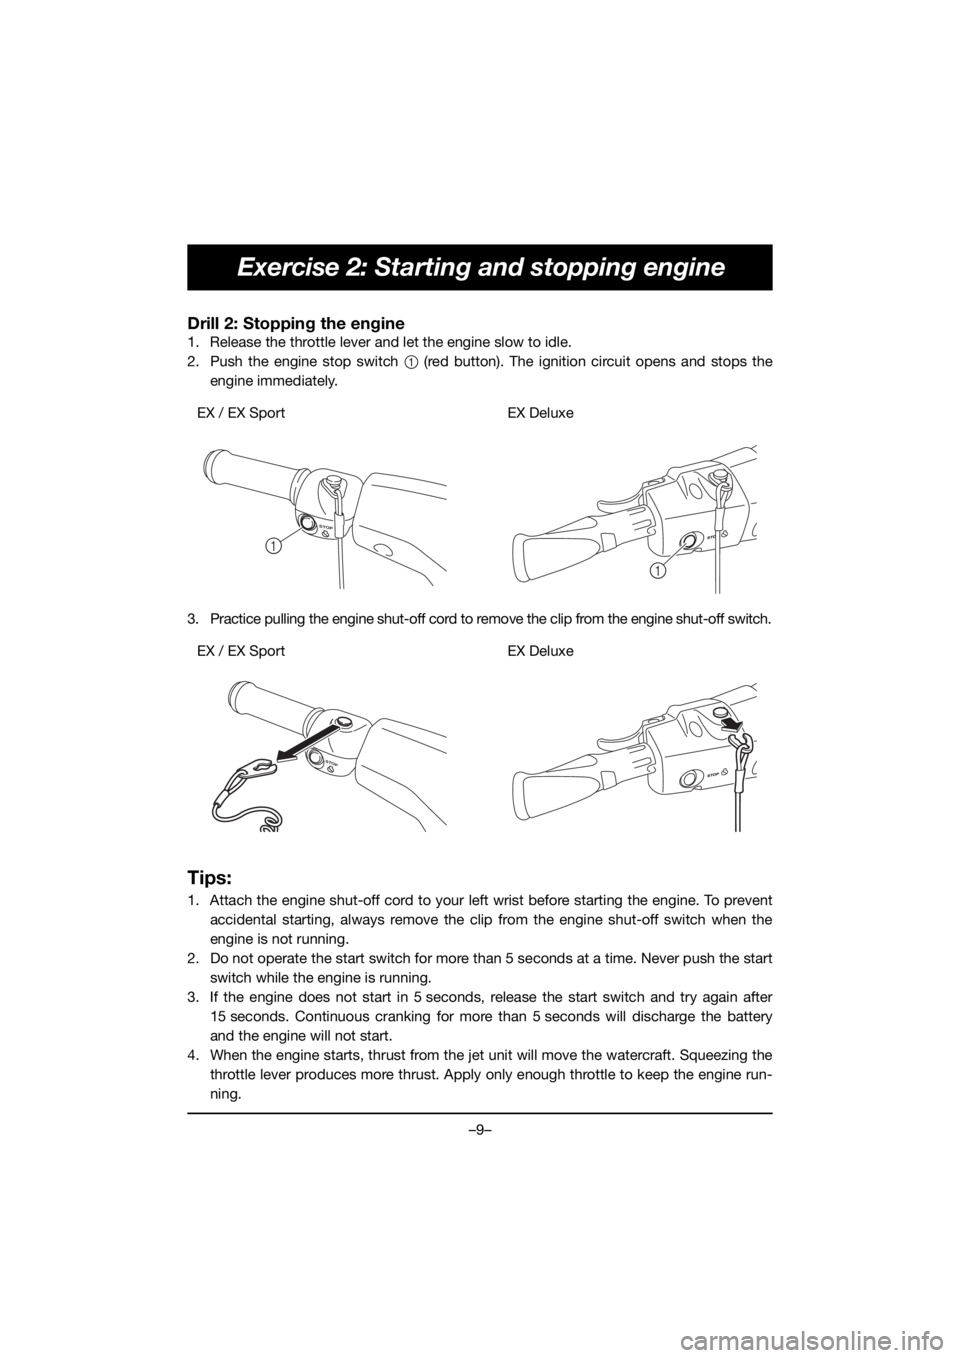 YAMAHA EX 2020 User Guide –9–
Exercise 2: Starting and stopping engine
Drill 2: Stopping the engine
1. Release the throttle lever and let the engine slow to idle.
2. Push the engine stop switch 1 (red button). The ignition